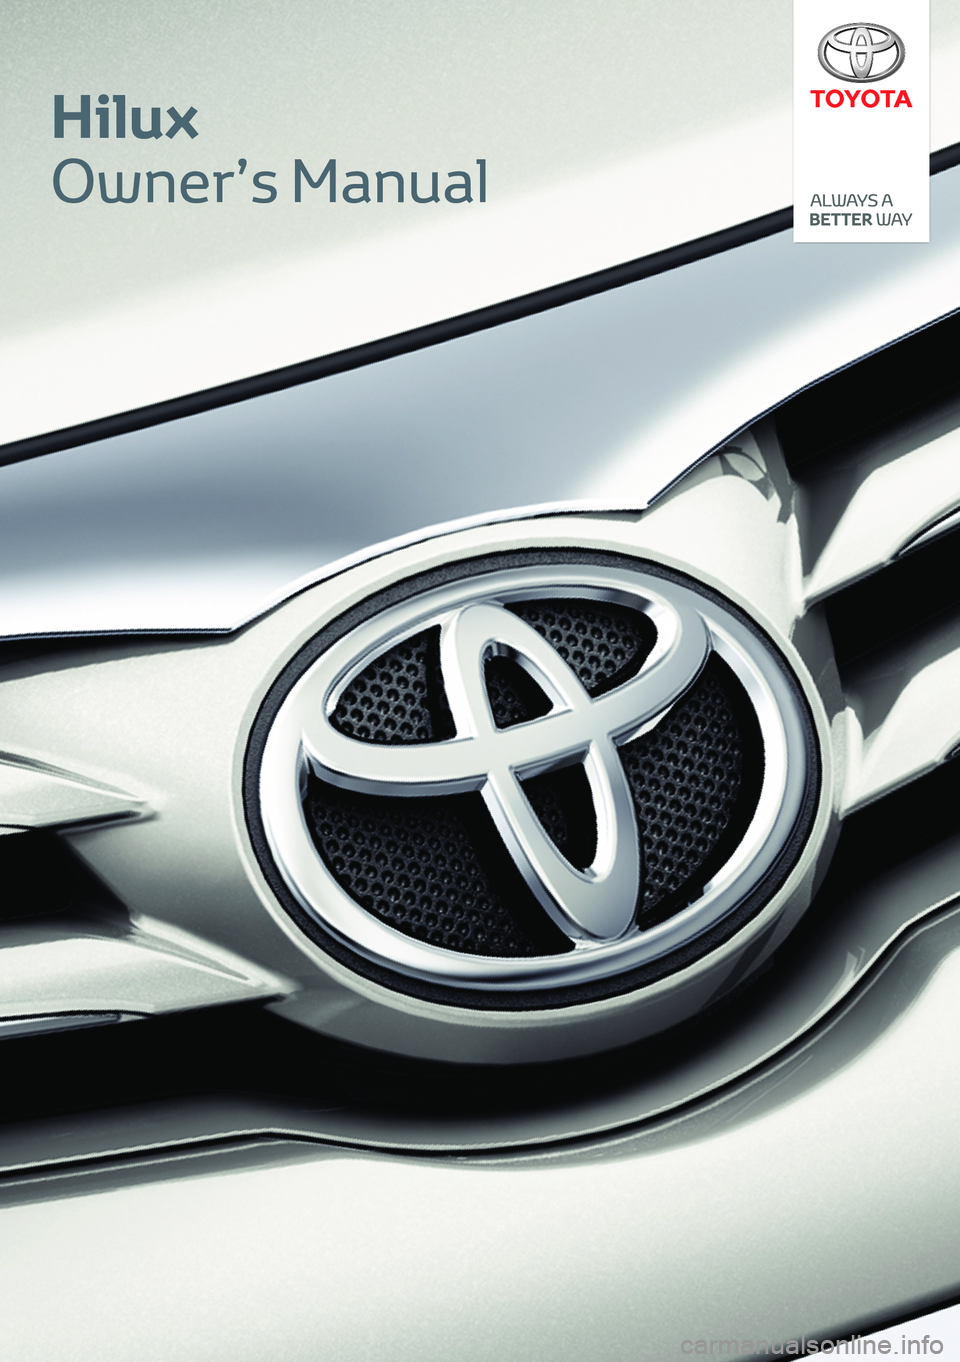 TOYOTA HILUX 2021  Manuale de Empleo (in Spanish) Hilux
Owner’s Manual 